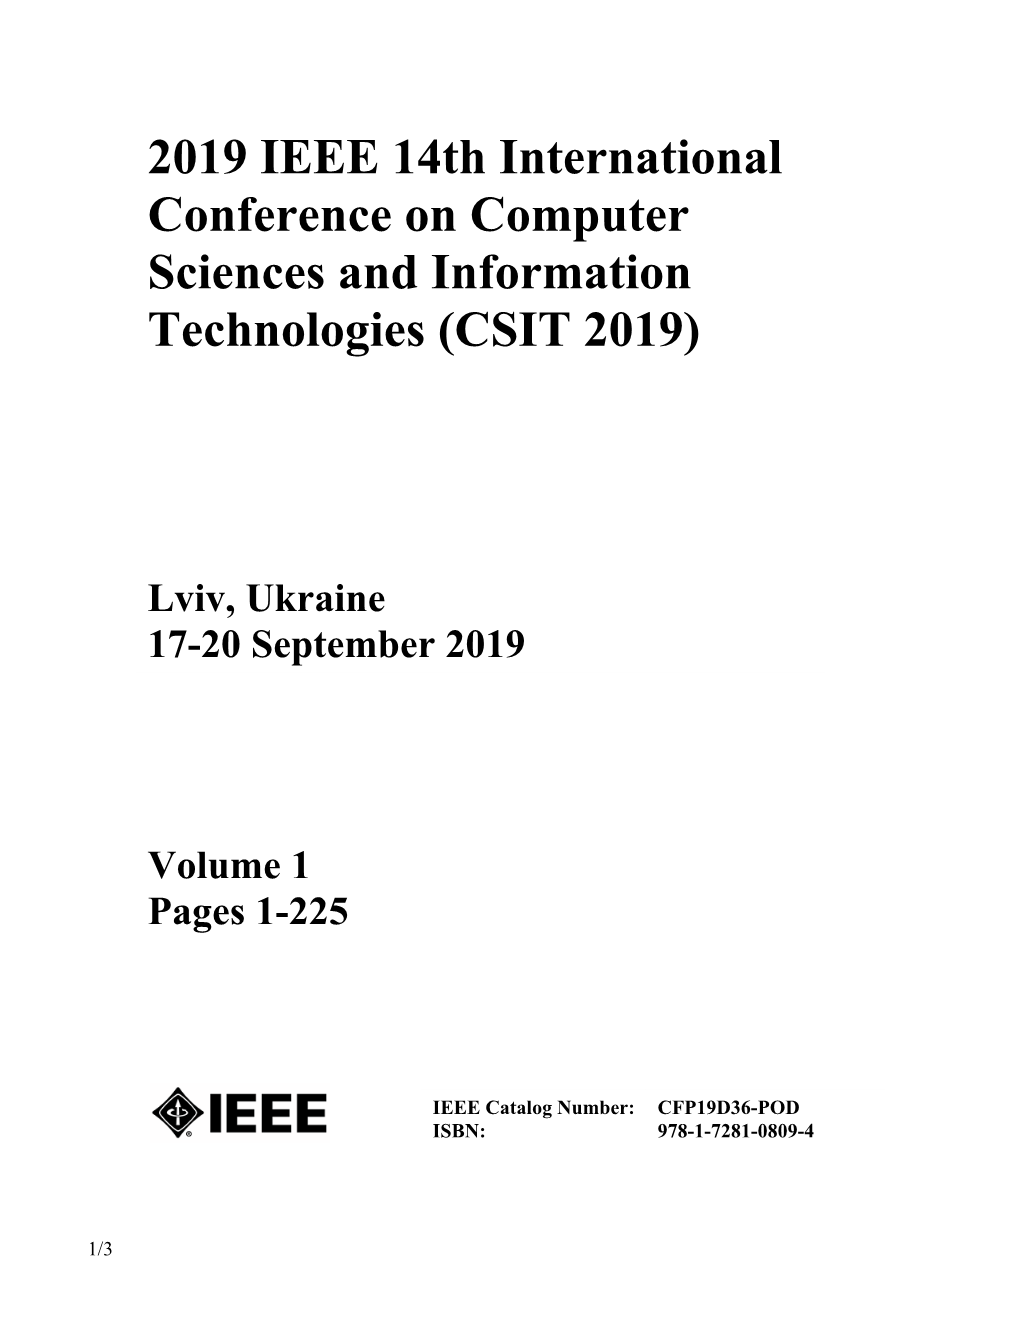 2019 IEEE 14Th International Conference on Computer Sciences and Information Technologies (CSIT 2019)